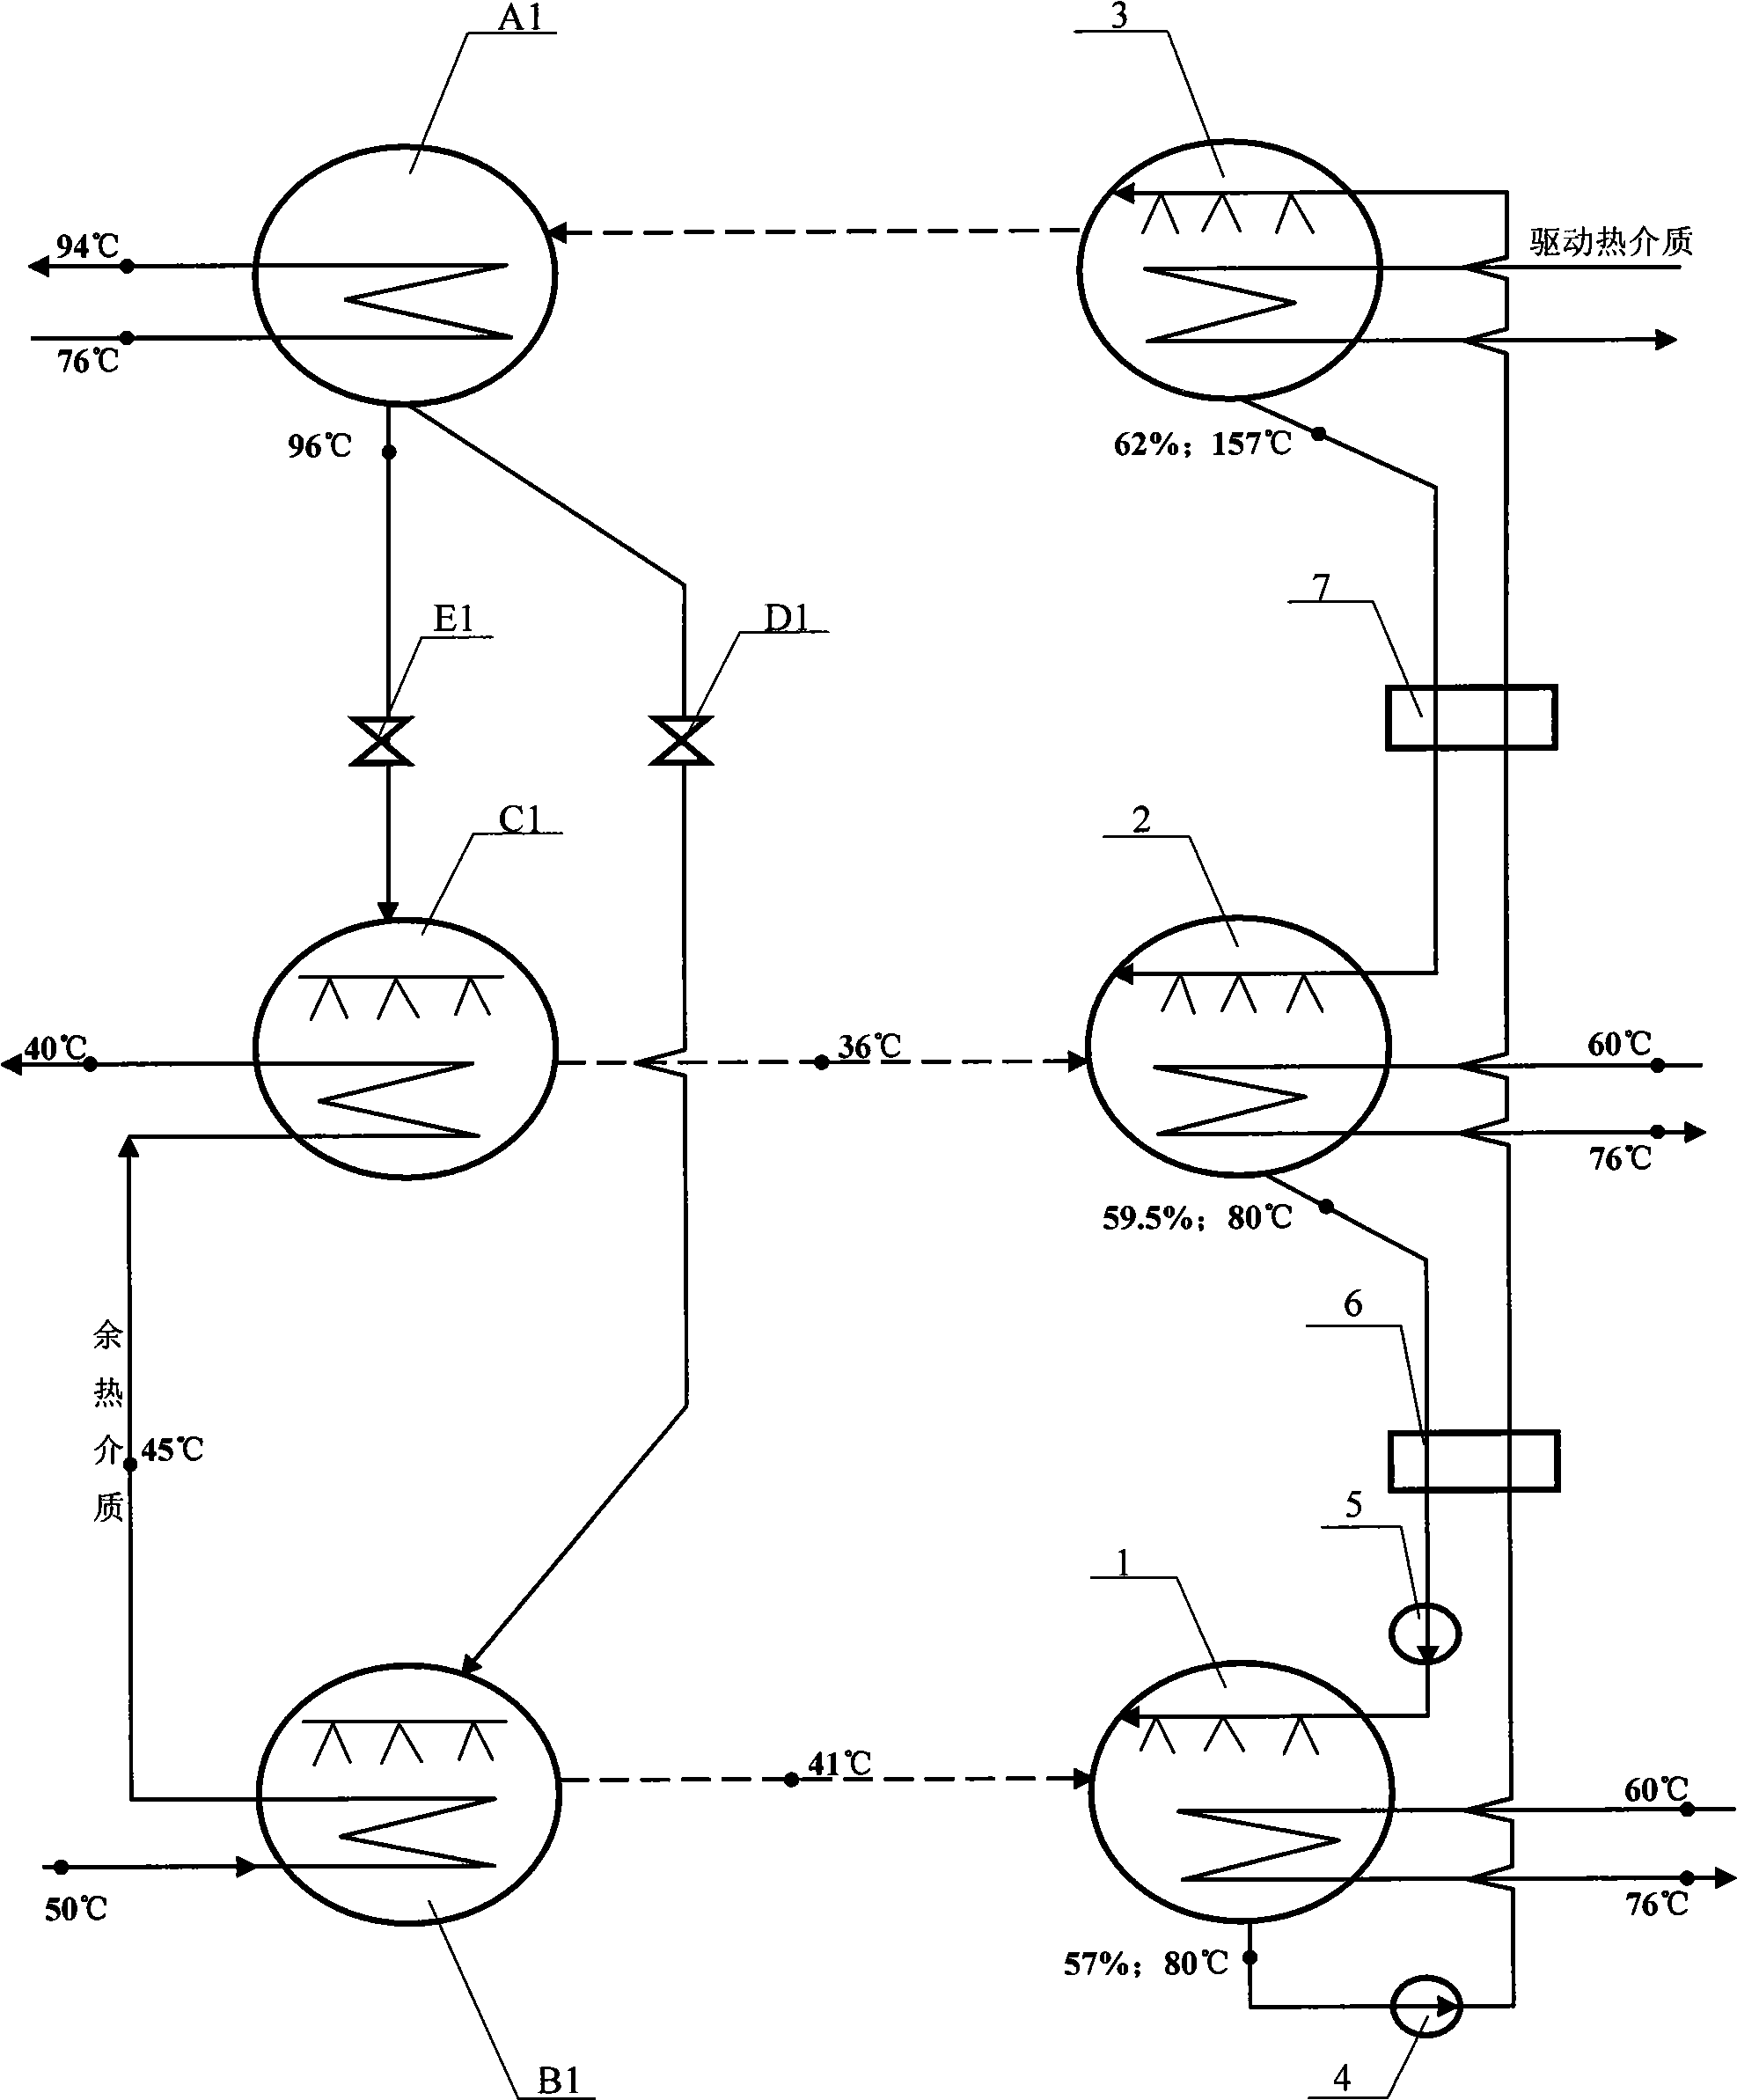 Generation-absorption-reabsorption system and absorption unit type based on system